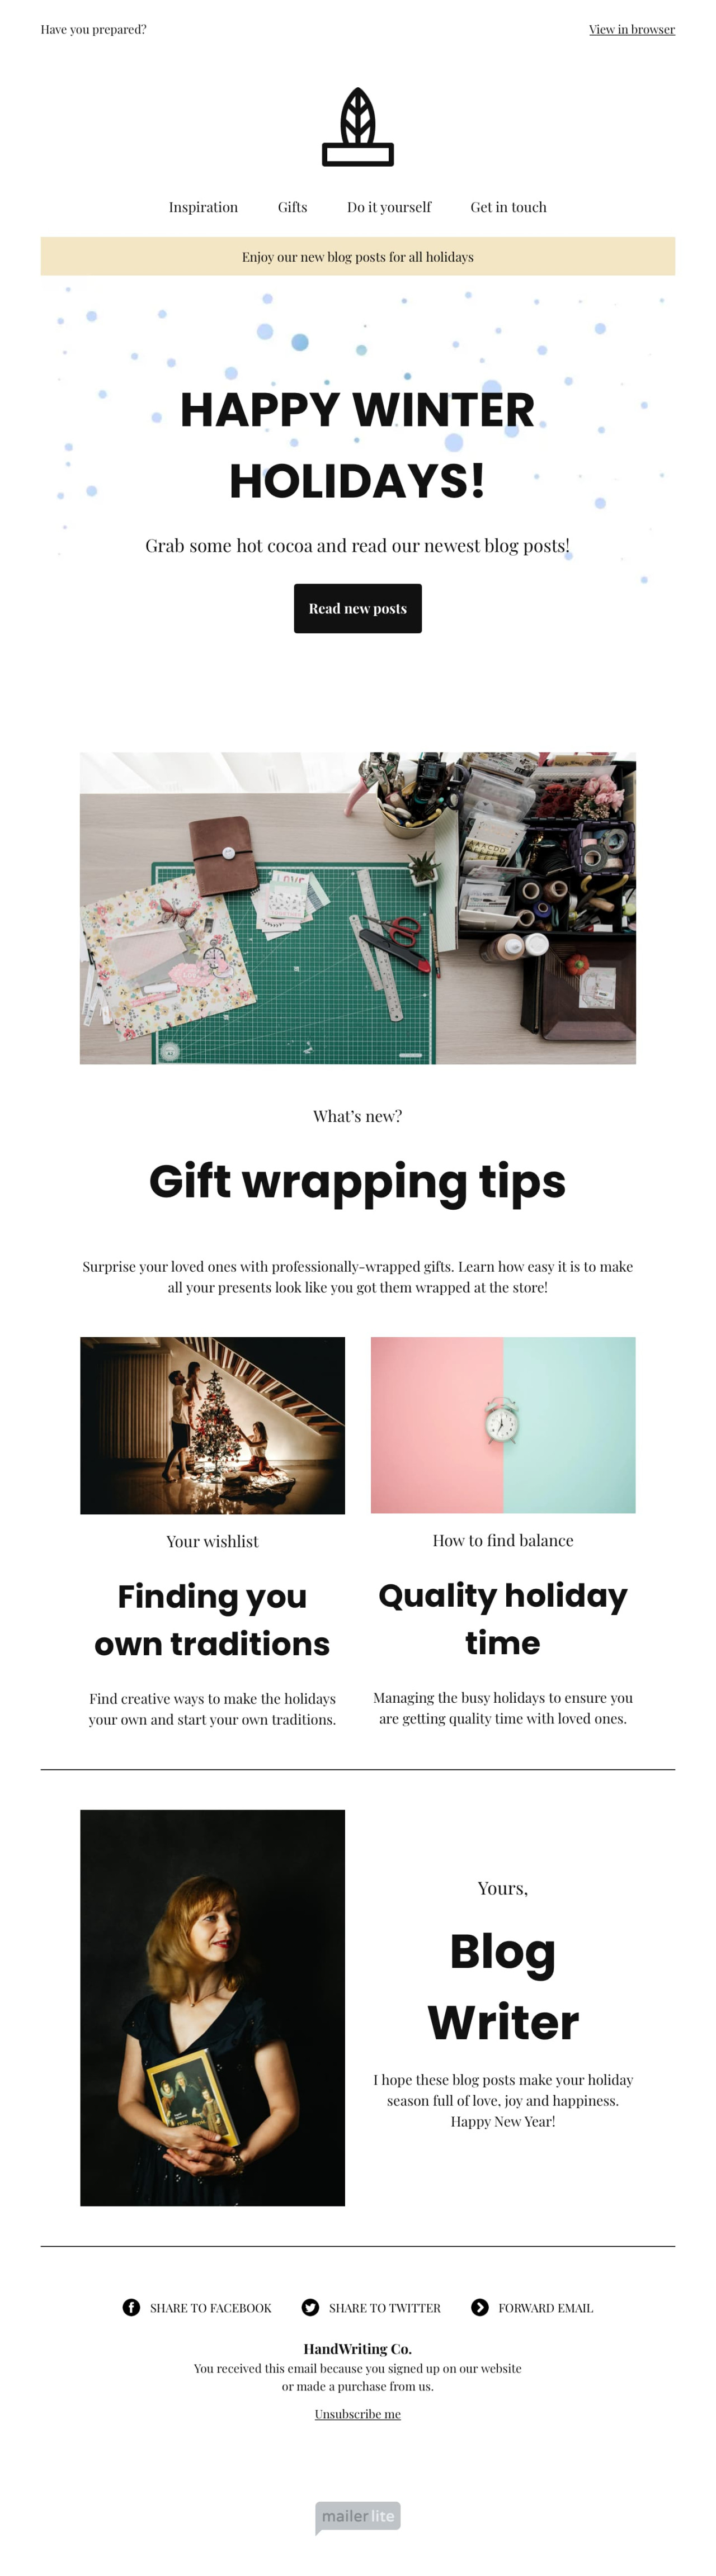 Holiday blog content template - Made by MailerLite